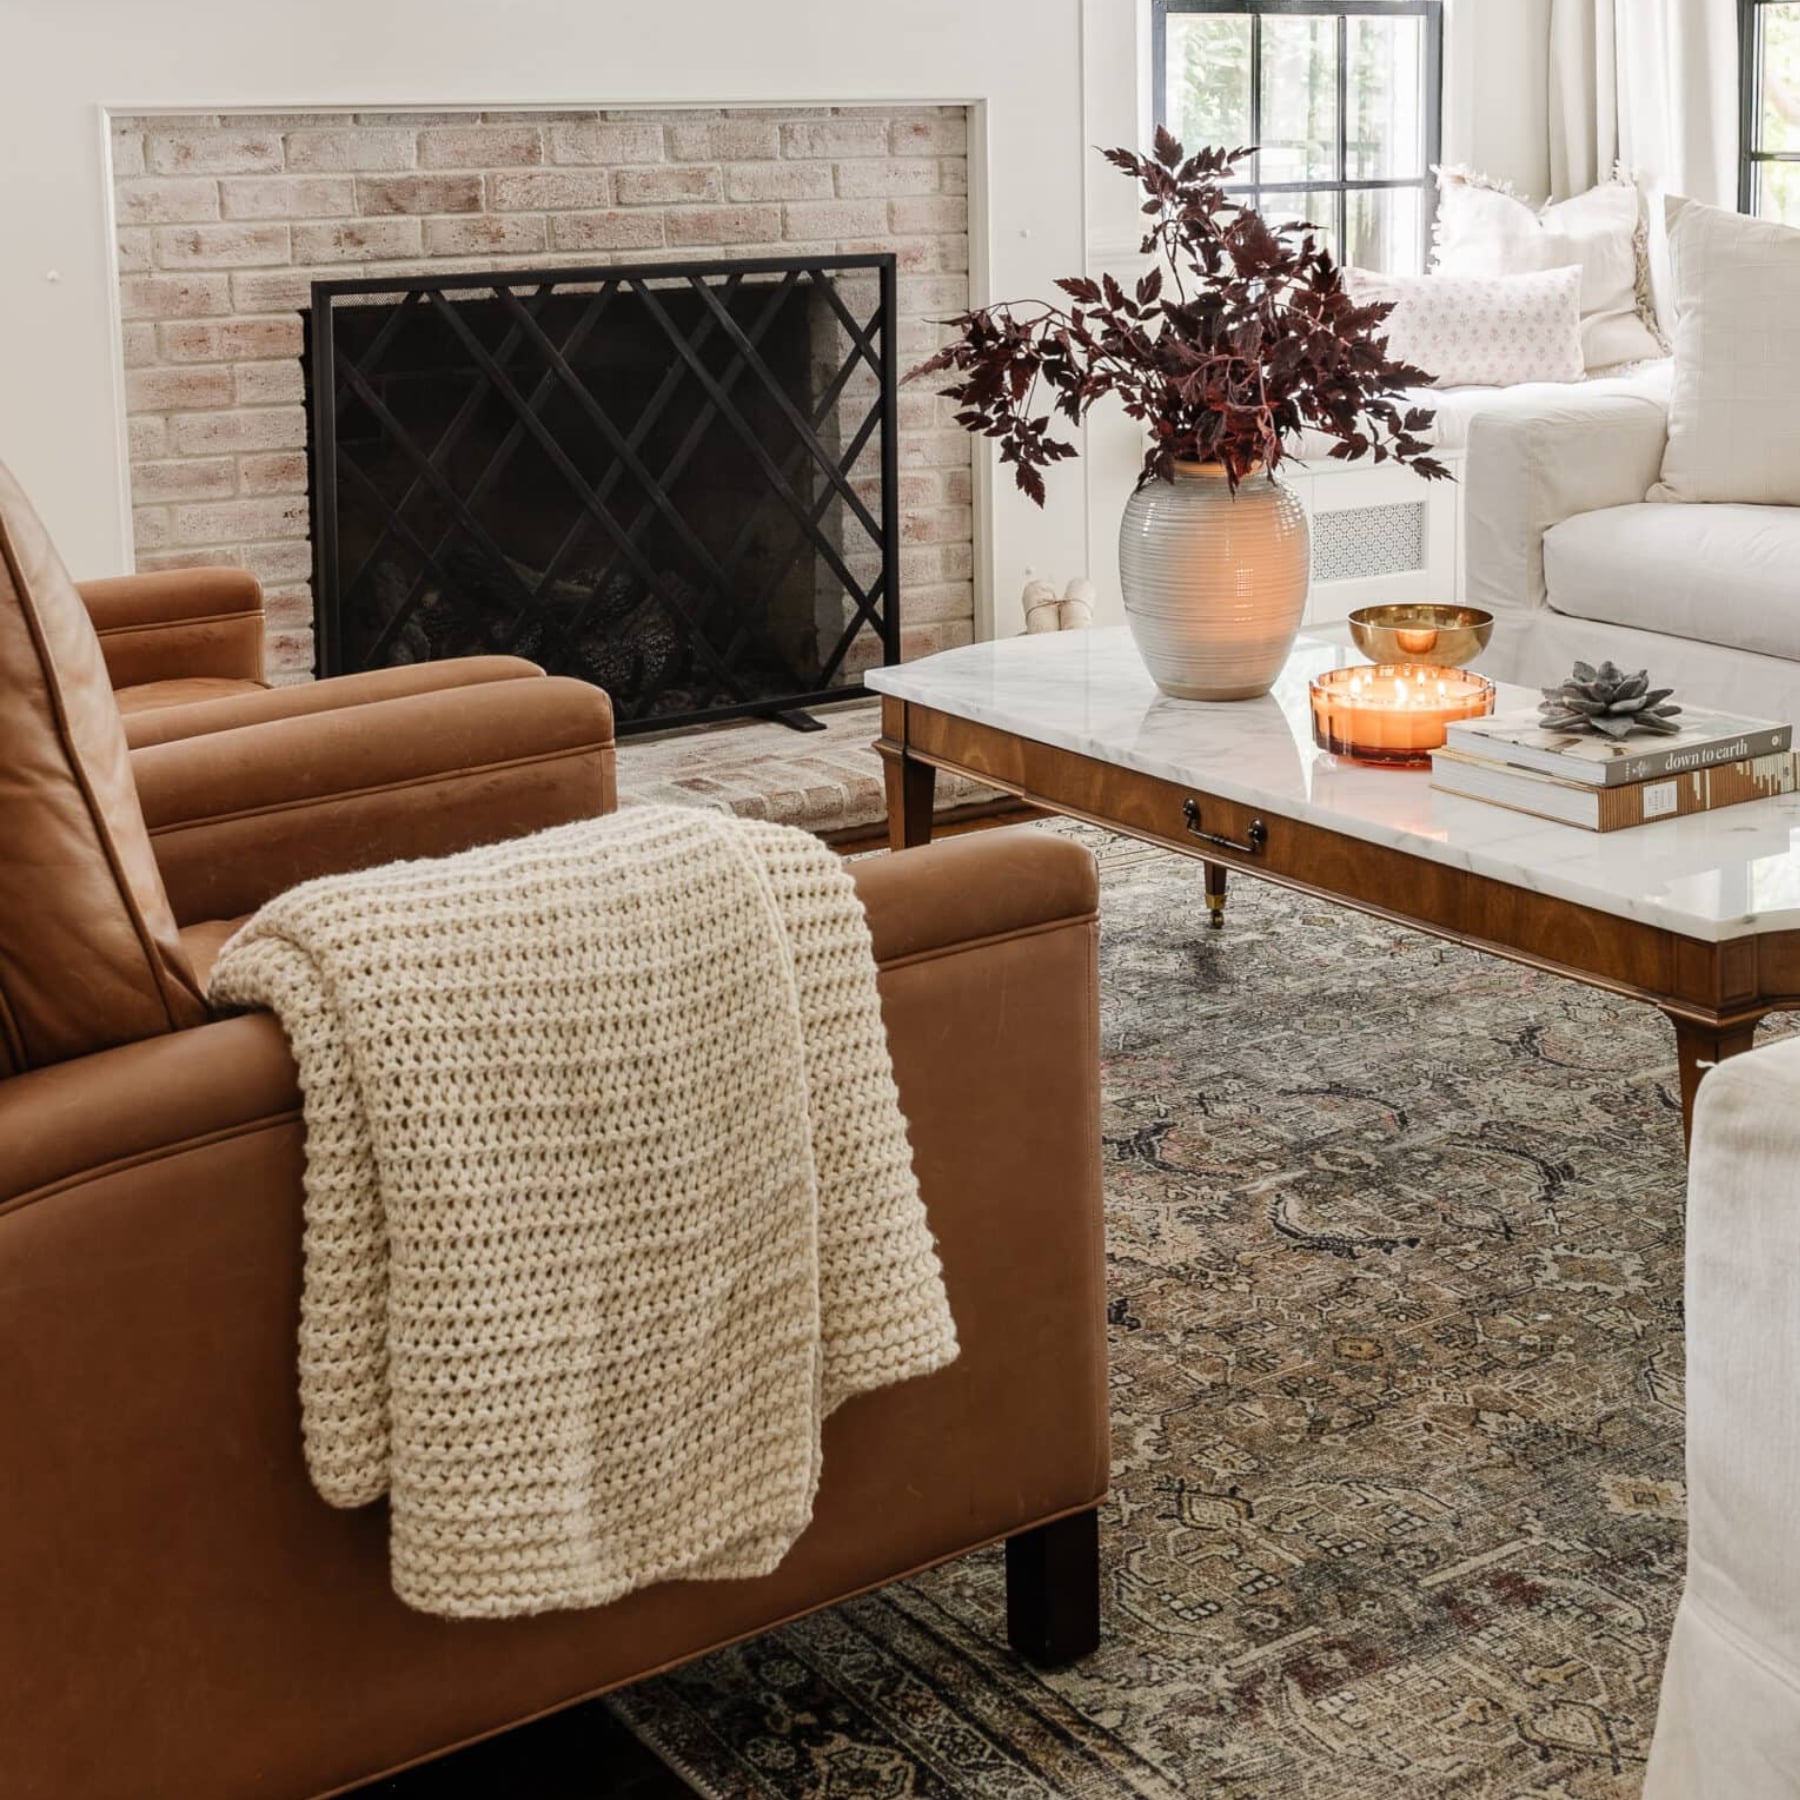 Add soft and luxurious decorations to create the perfect thanksgiving mood